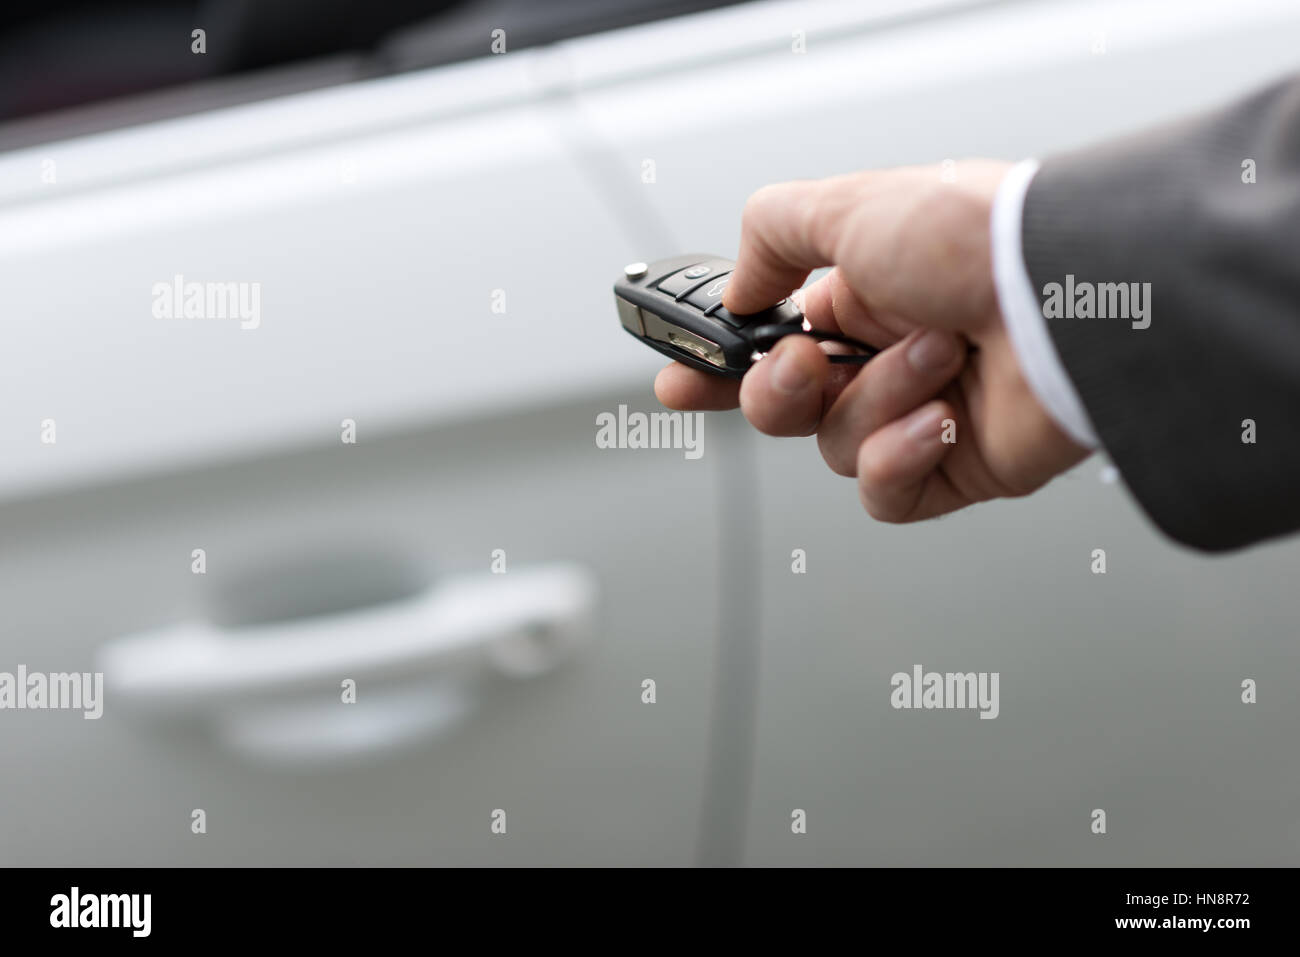 Businessman holding a car key with remote control and pushing a button, he is unlocking the door, hand close up Stock Photo